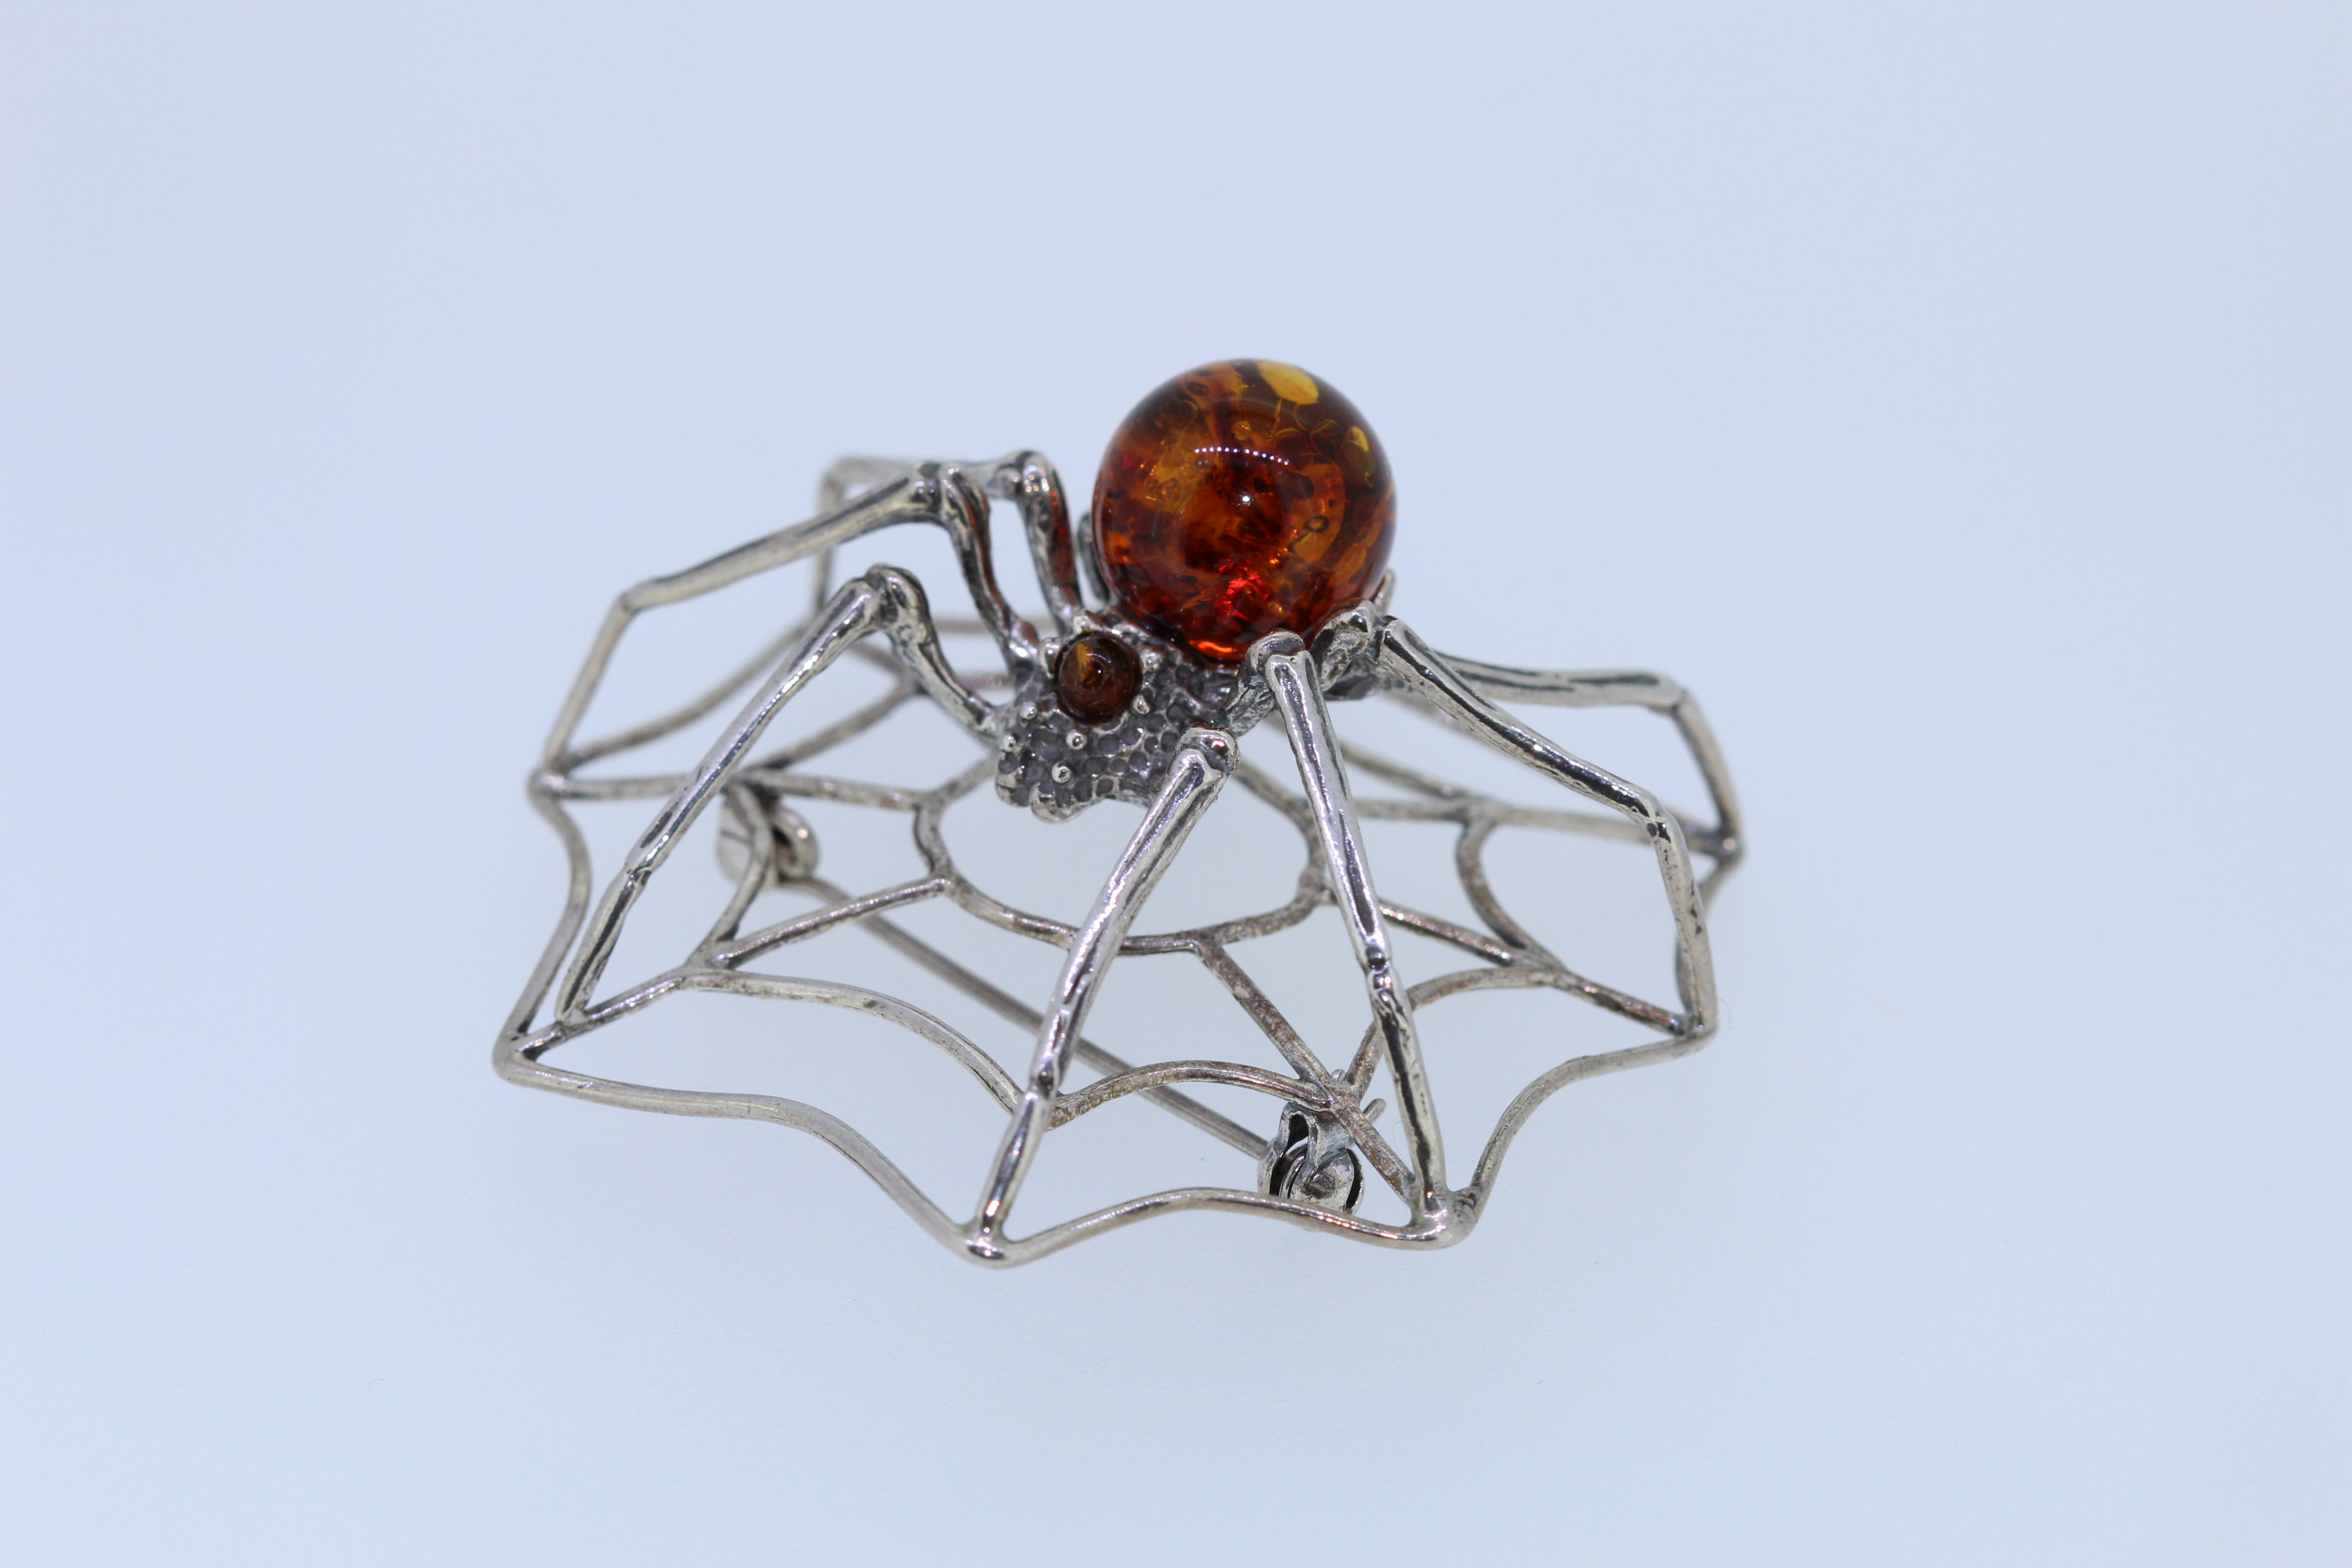 Stamped 925 Silver Natural Amber Large Spider Broach - Image 2 of 4